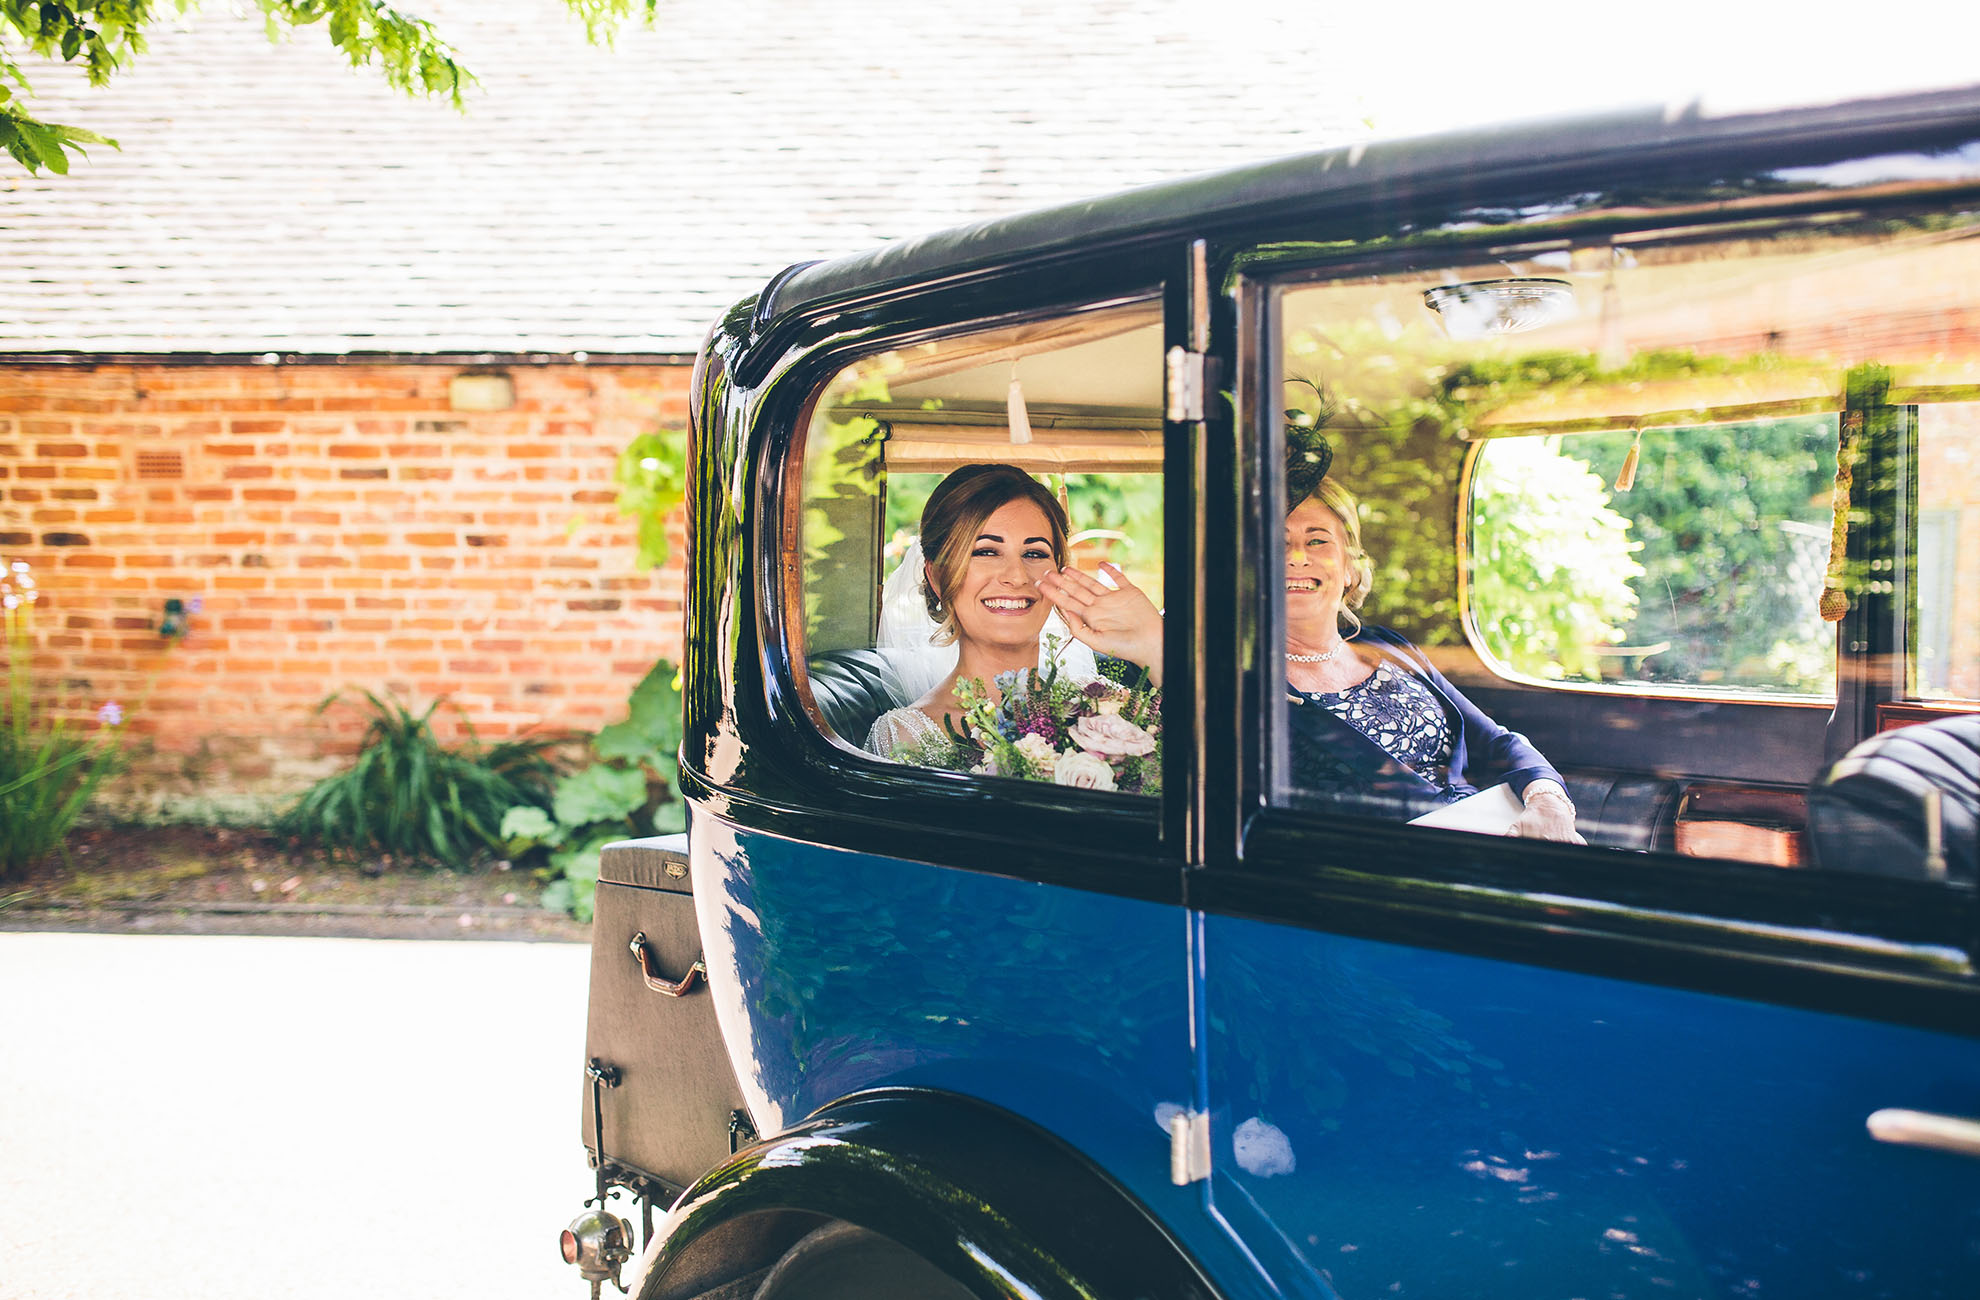 The bride arrives for her wedding ceremony at Combermere Abbey in the dedicated Crossley car